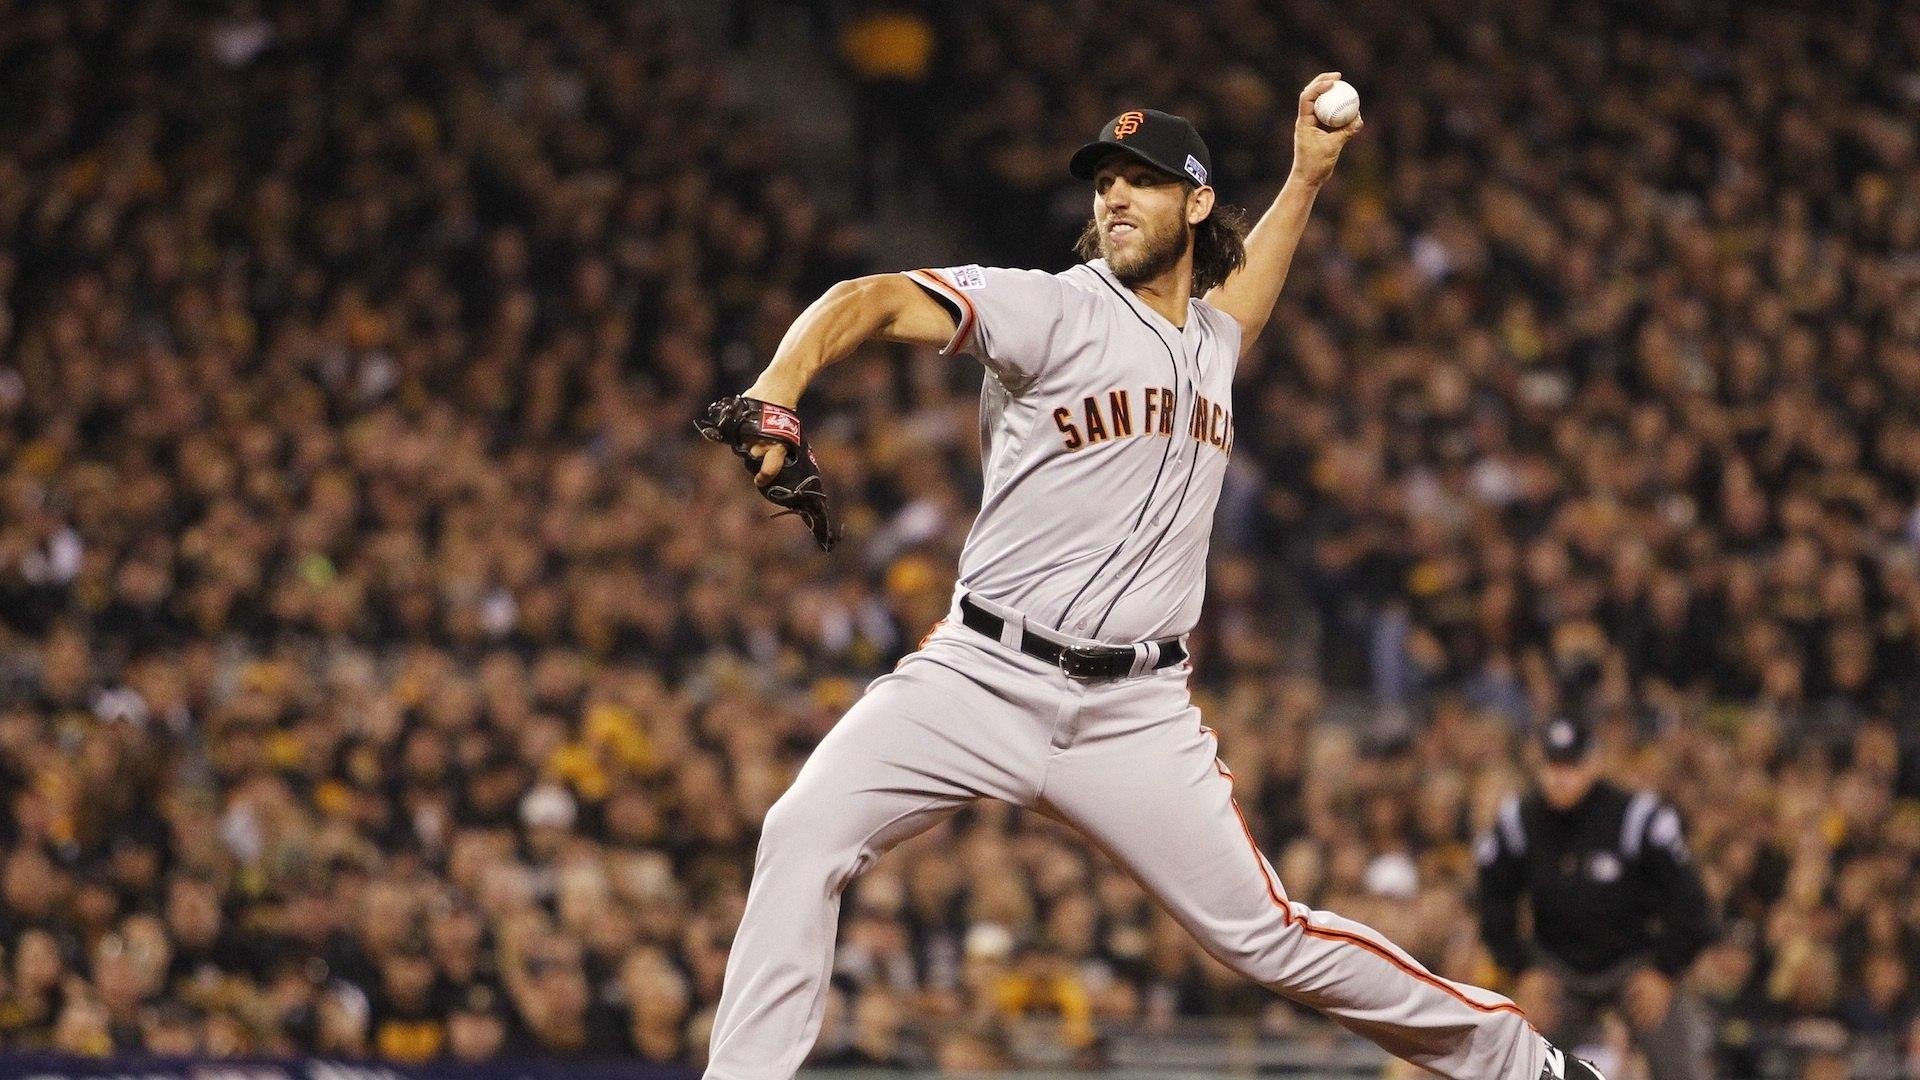 Giants' Madison Bumgarner Chugs 4 Beers After Shutting Out Pirates